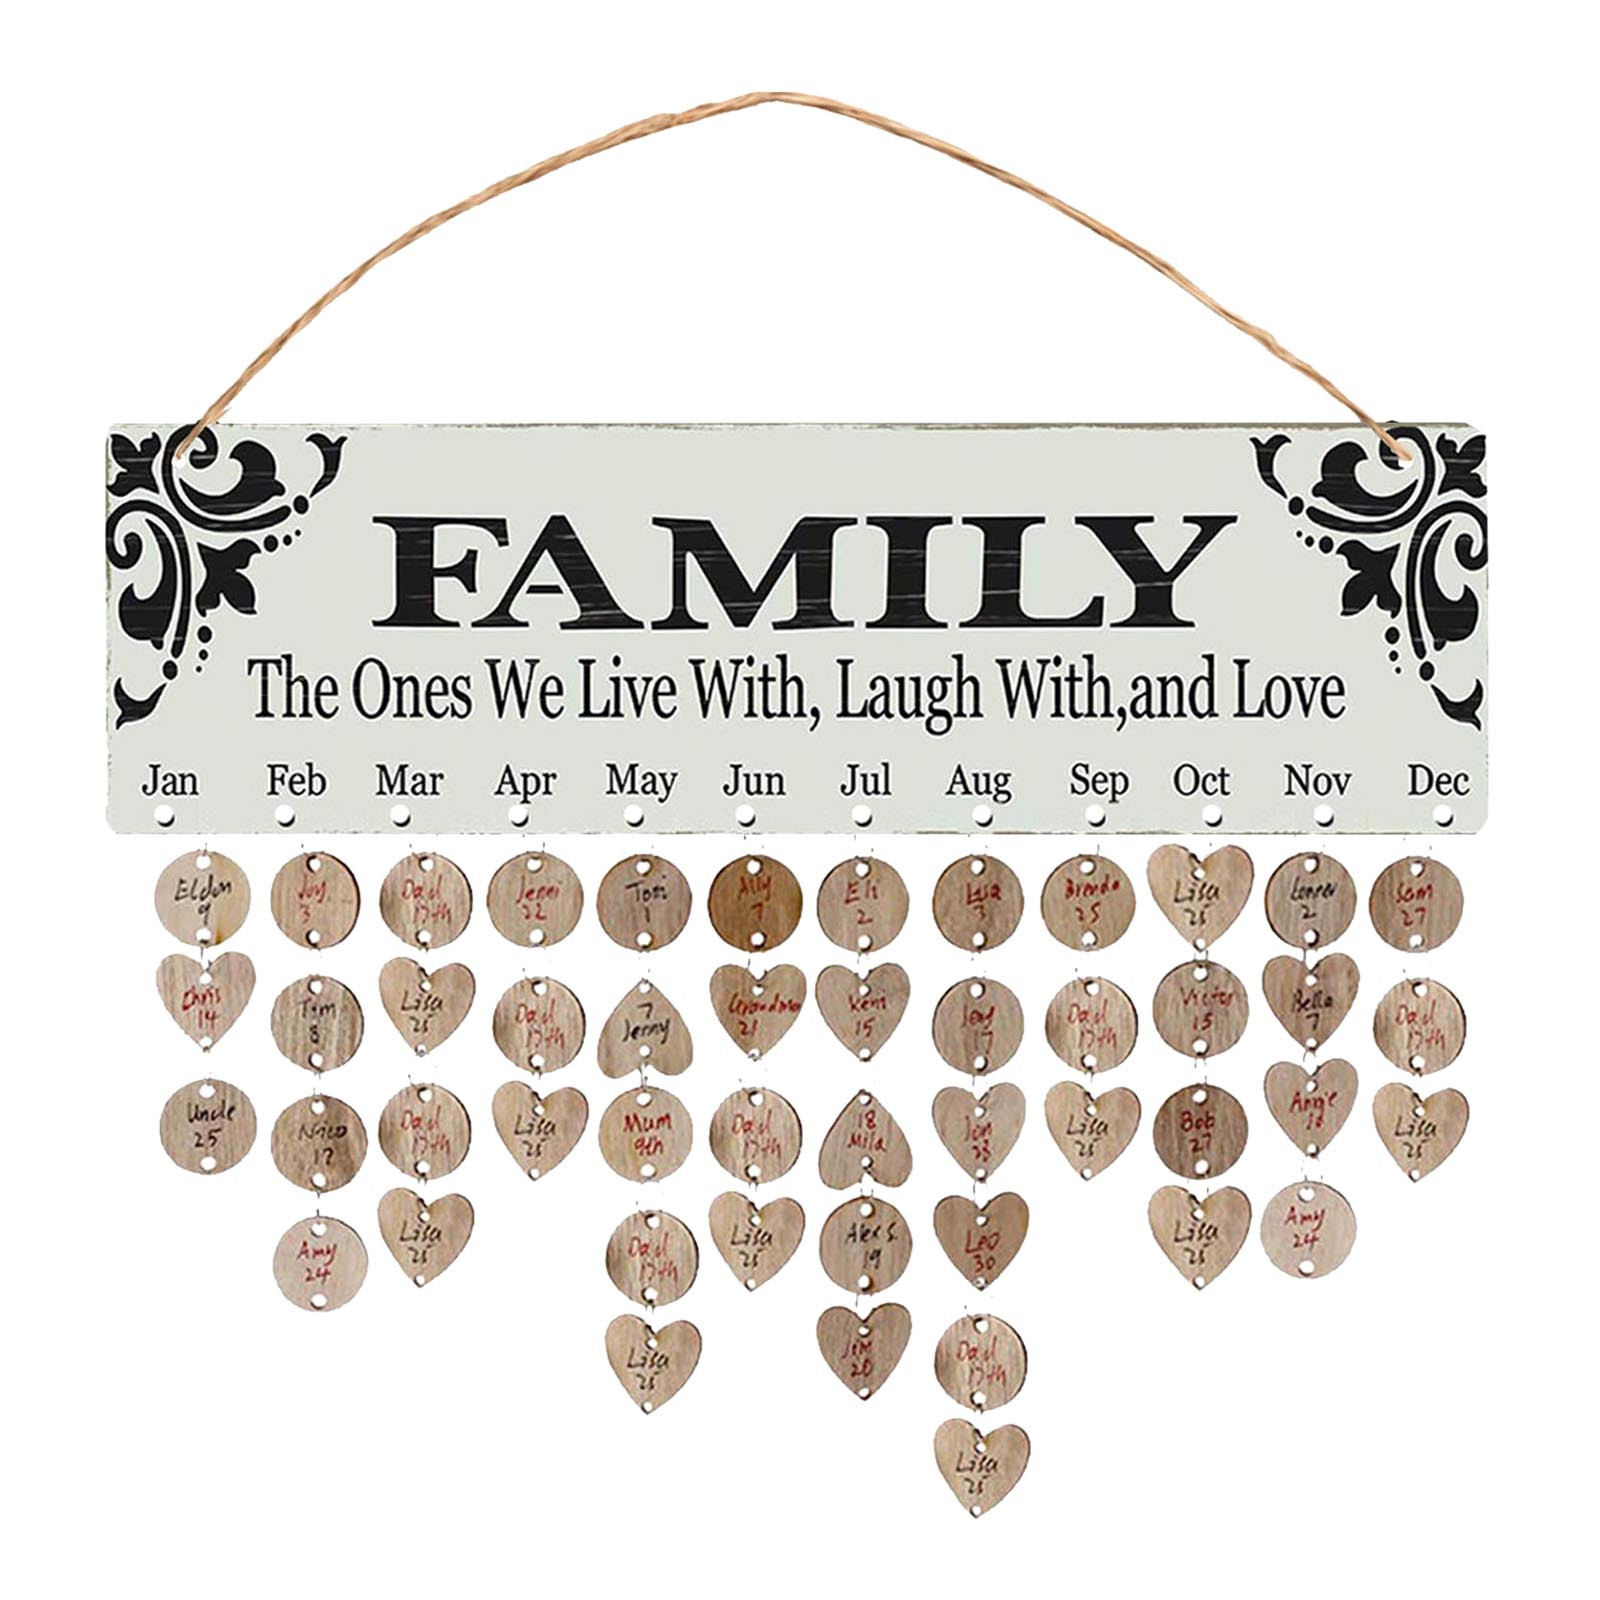 Family And Gift Wooden Birthday Reminder Calendar Birthday Tracker Wall Hanging Plaque Board Sign Diy Home Decoration Gifts